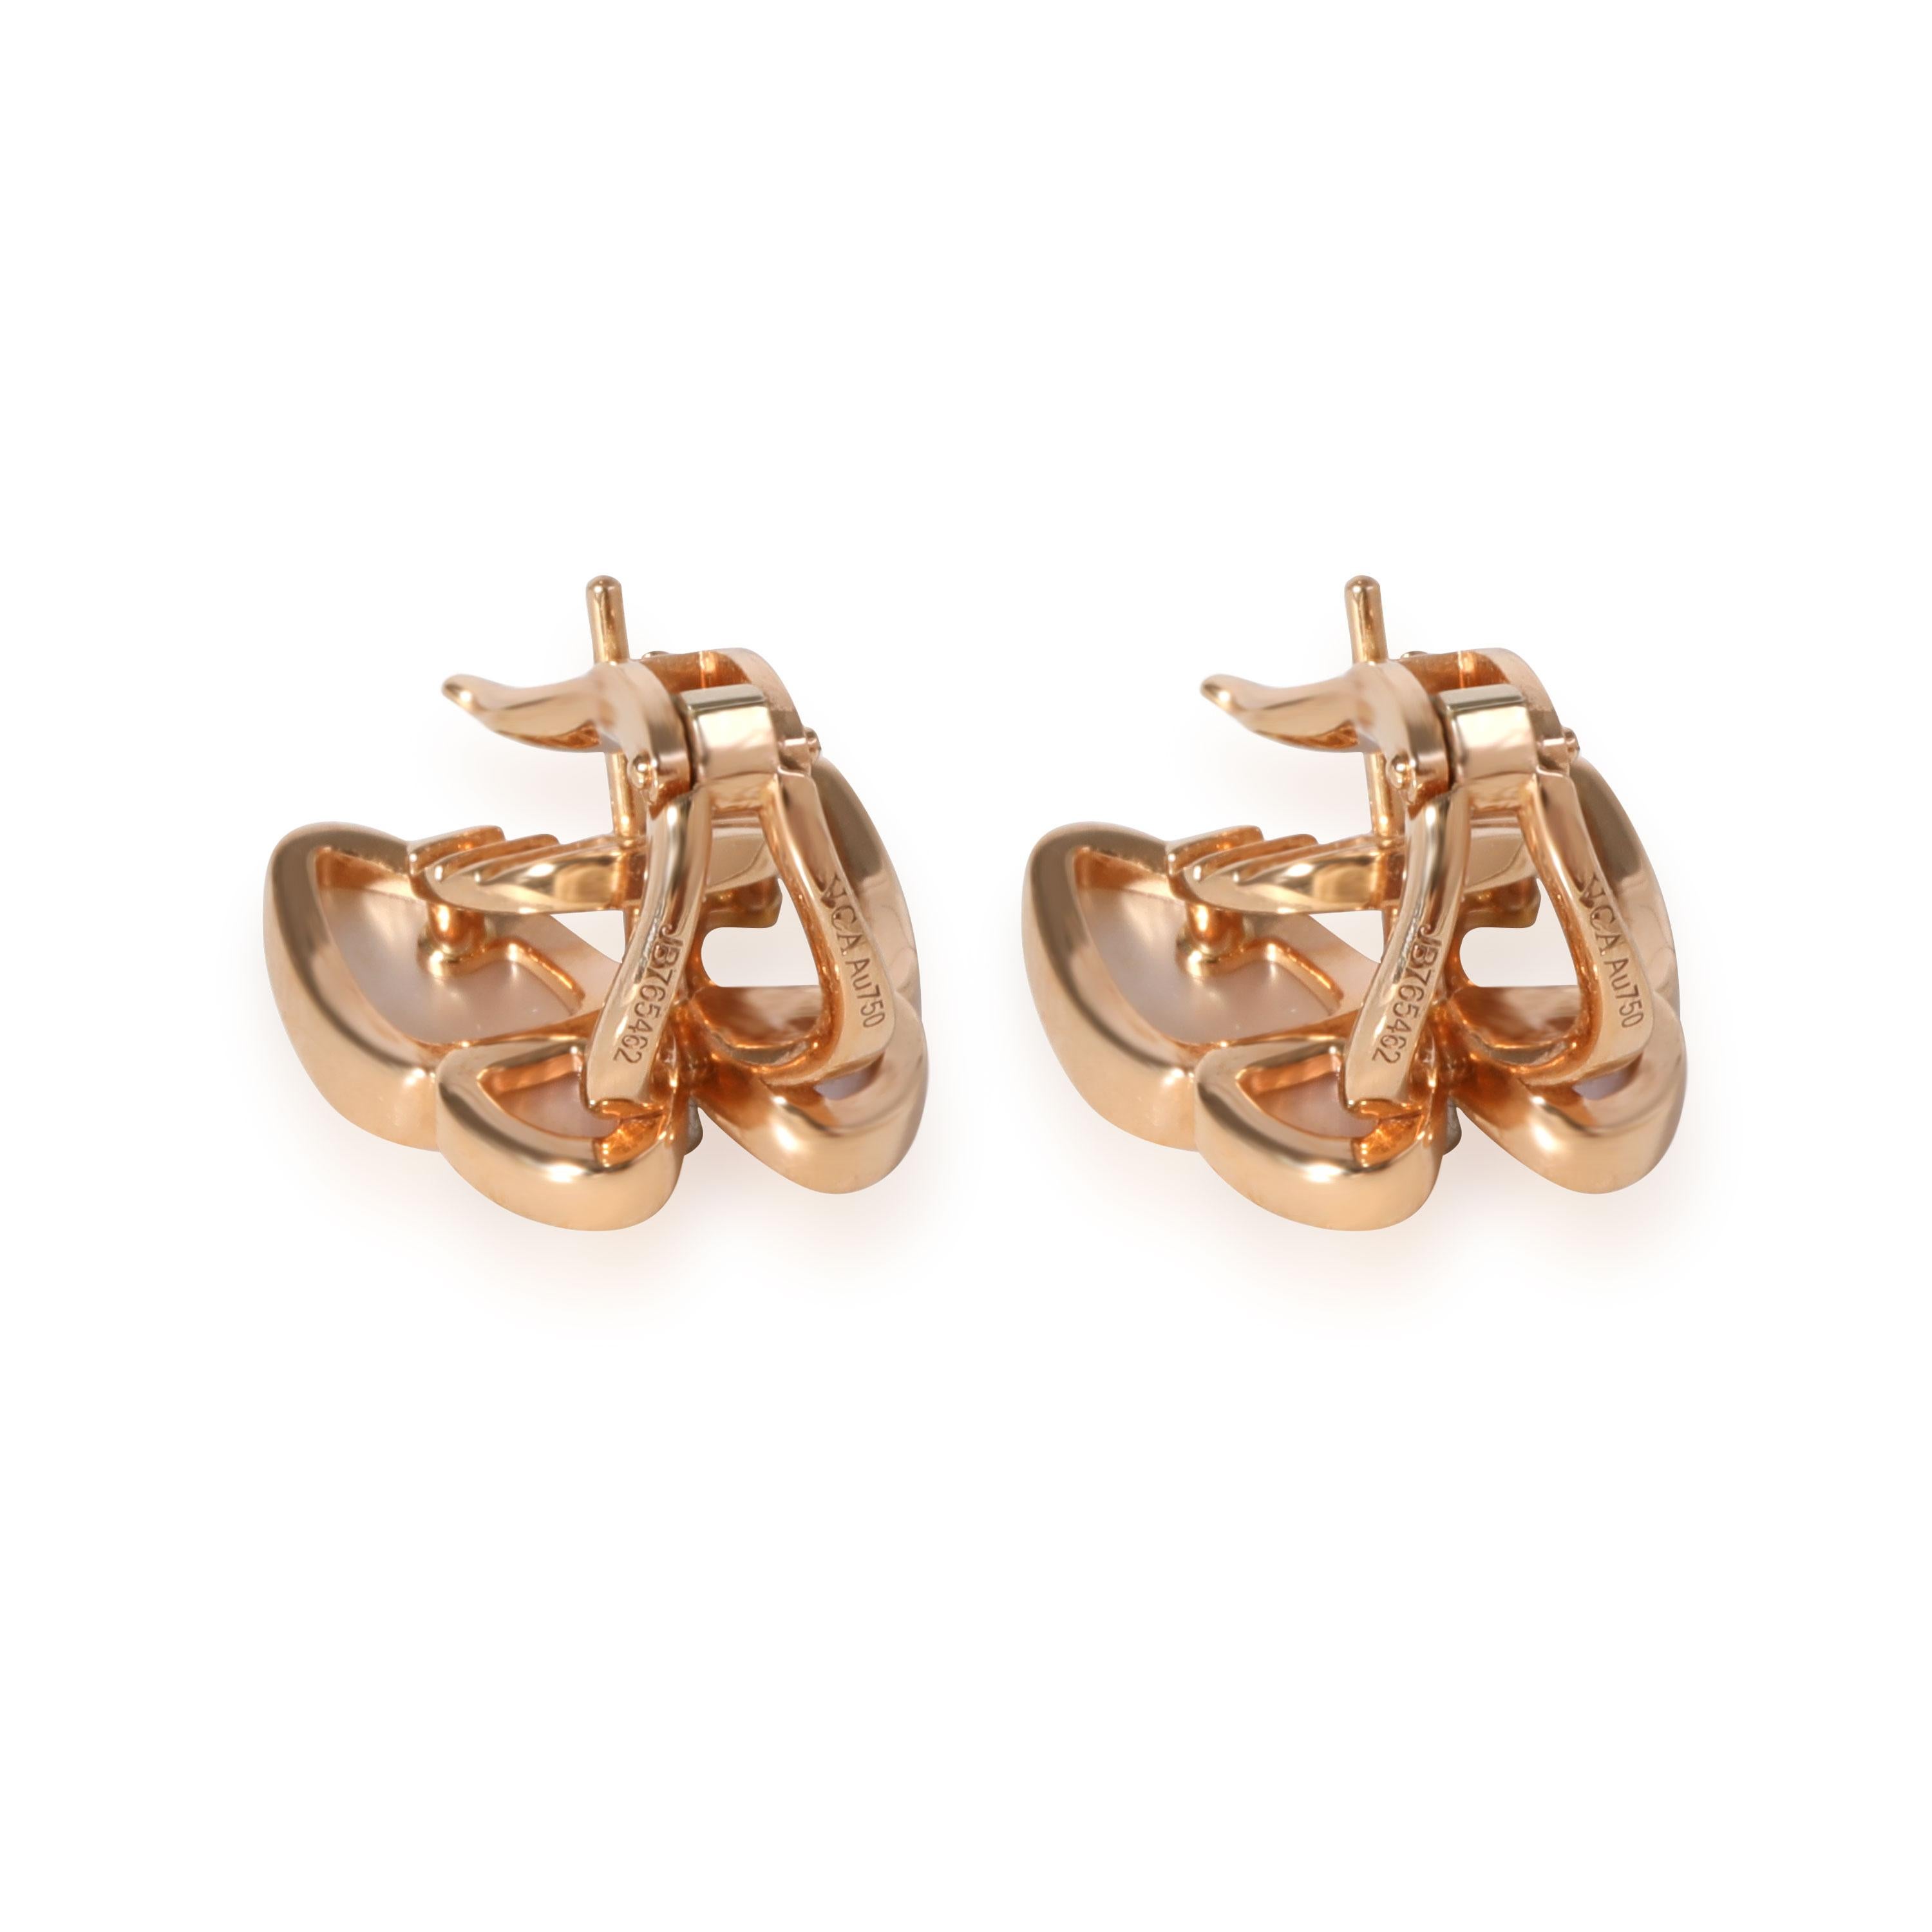 Van Cleef & Arpels Butterfly Mother Of Pearl Diamond Earrings in 18k Rose Gold

PRIMARY DETAILS
SKU: 119957
Listing Title: Van Cleef & Arpels Butterfly Mother Of Pearl Diamond Earrings in 18k Rose Gold
Condition Description: Retails for 14400 USD.